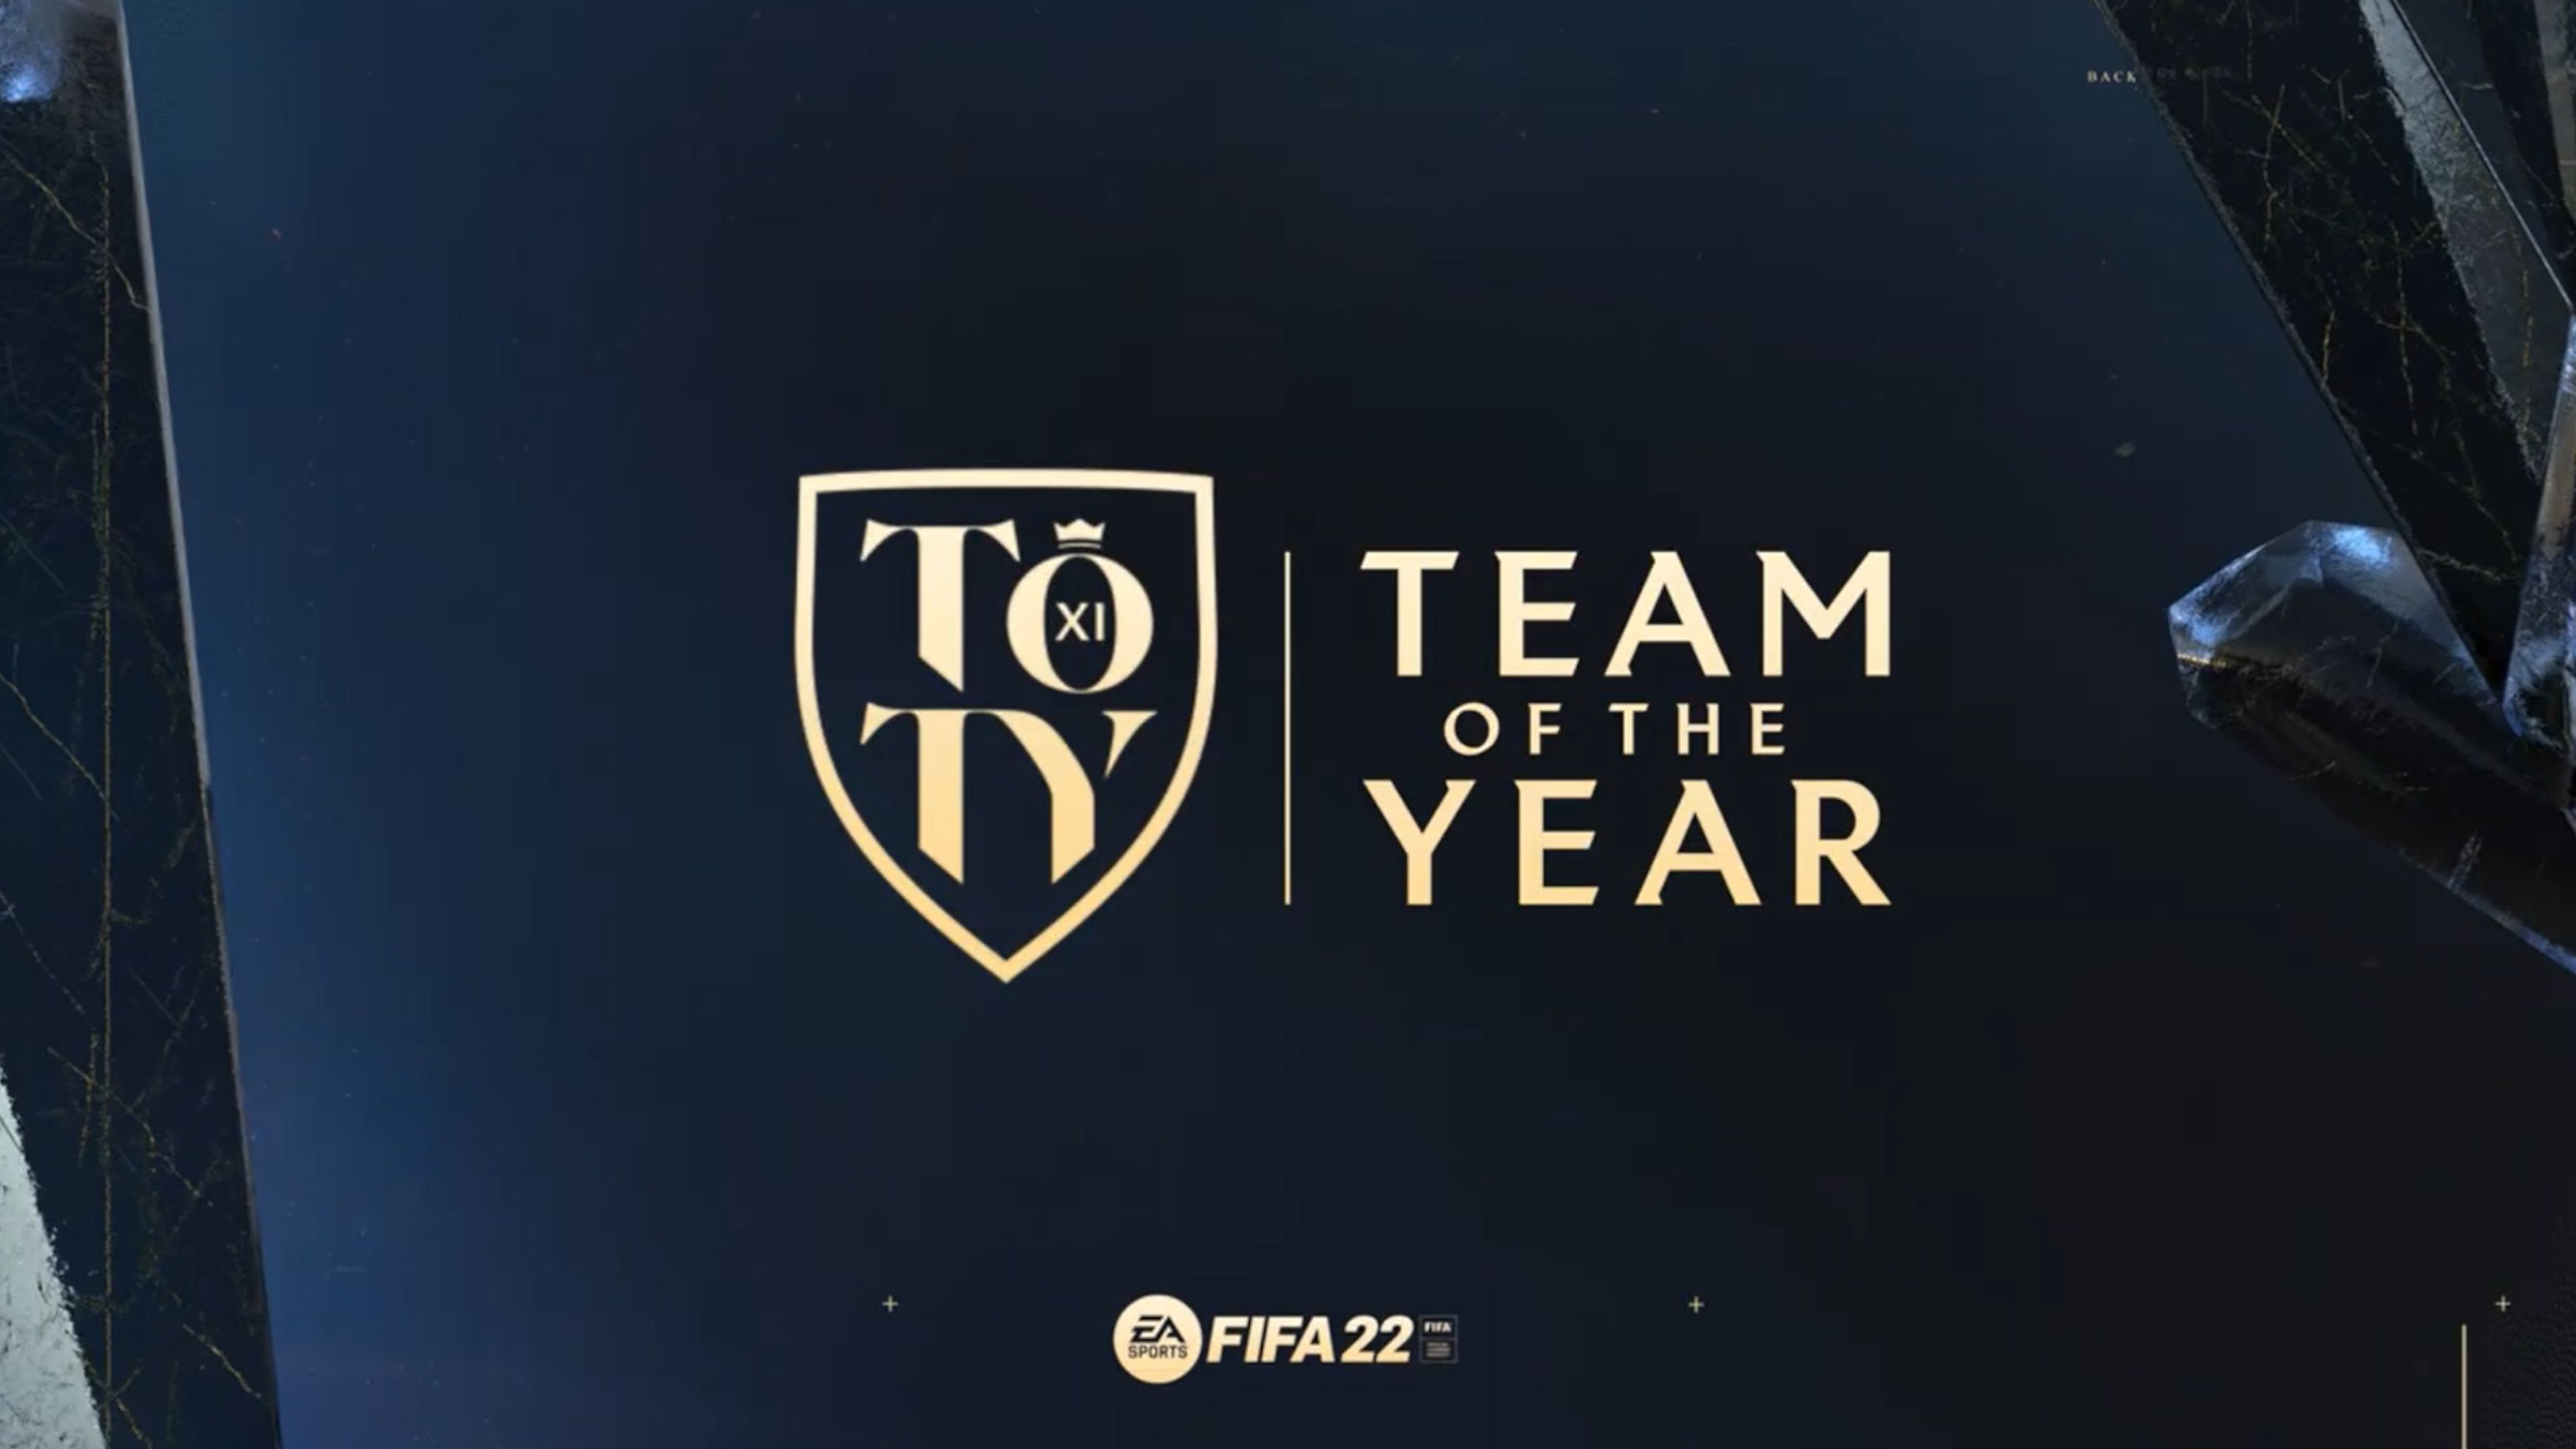 FIFA 22 TOTY Team of the year